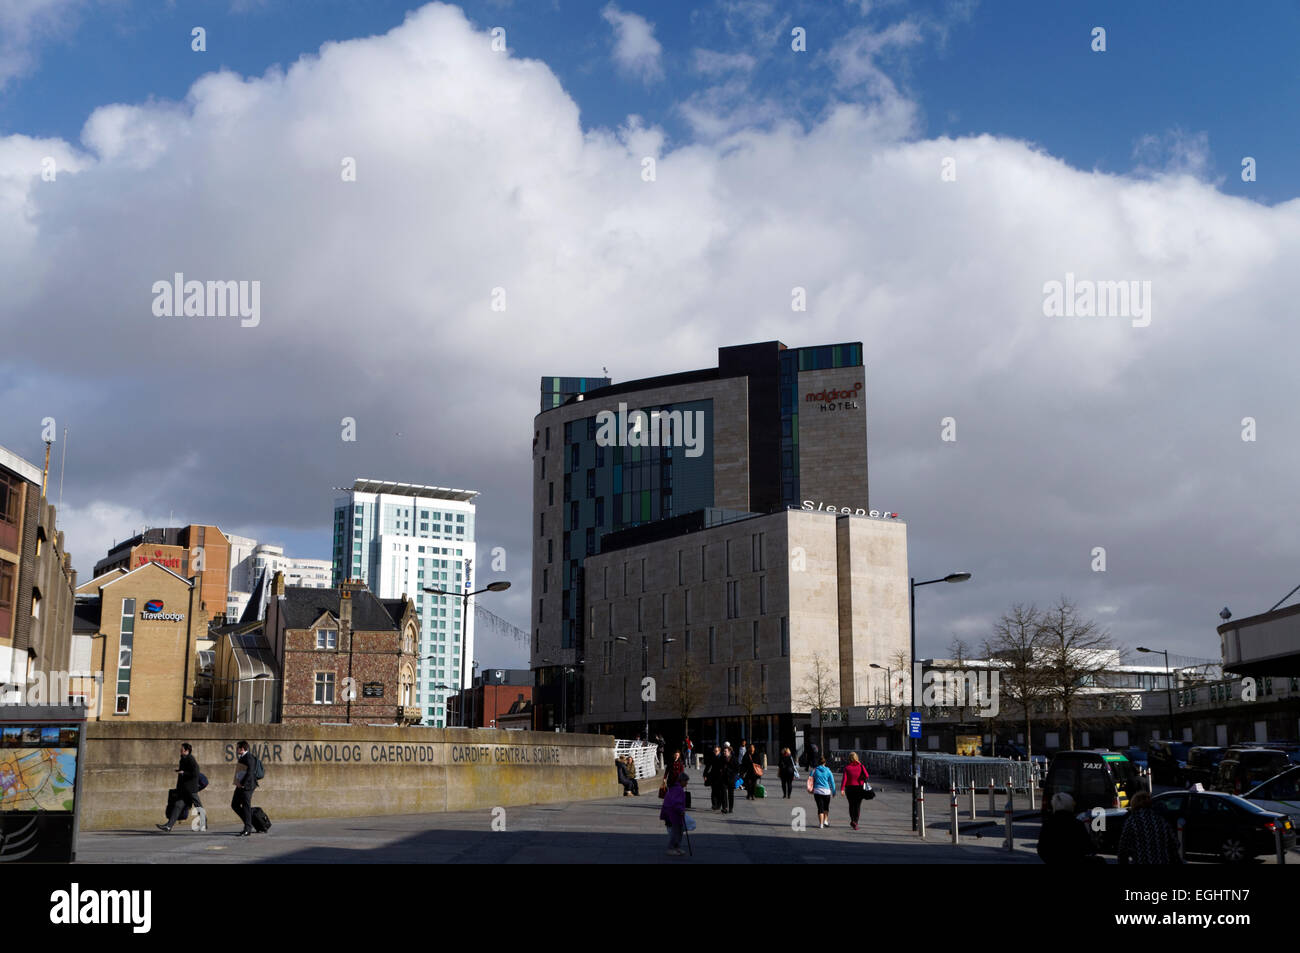 Central Square area due for redevelopment, Cardiff, Wales, UK. Stock Photo